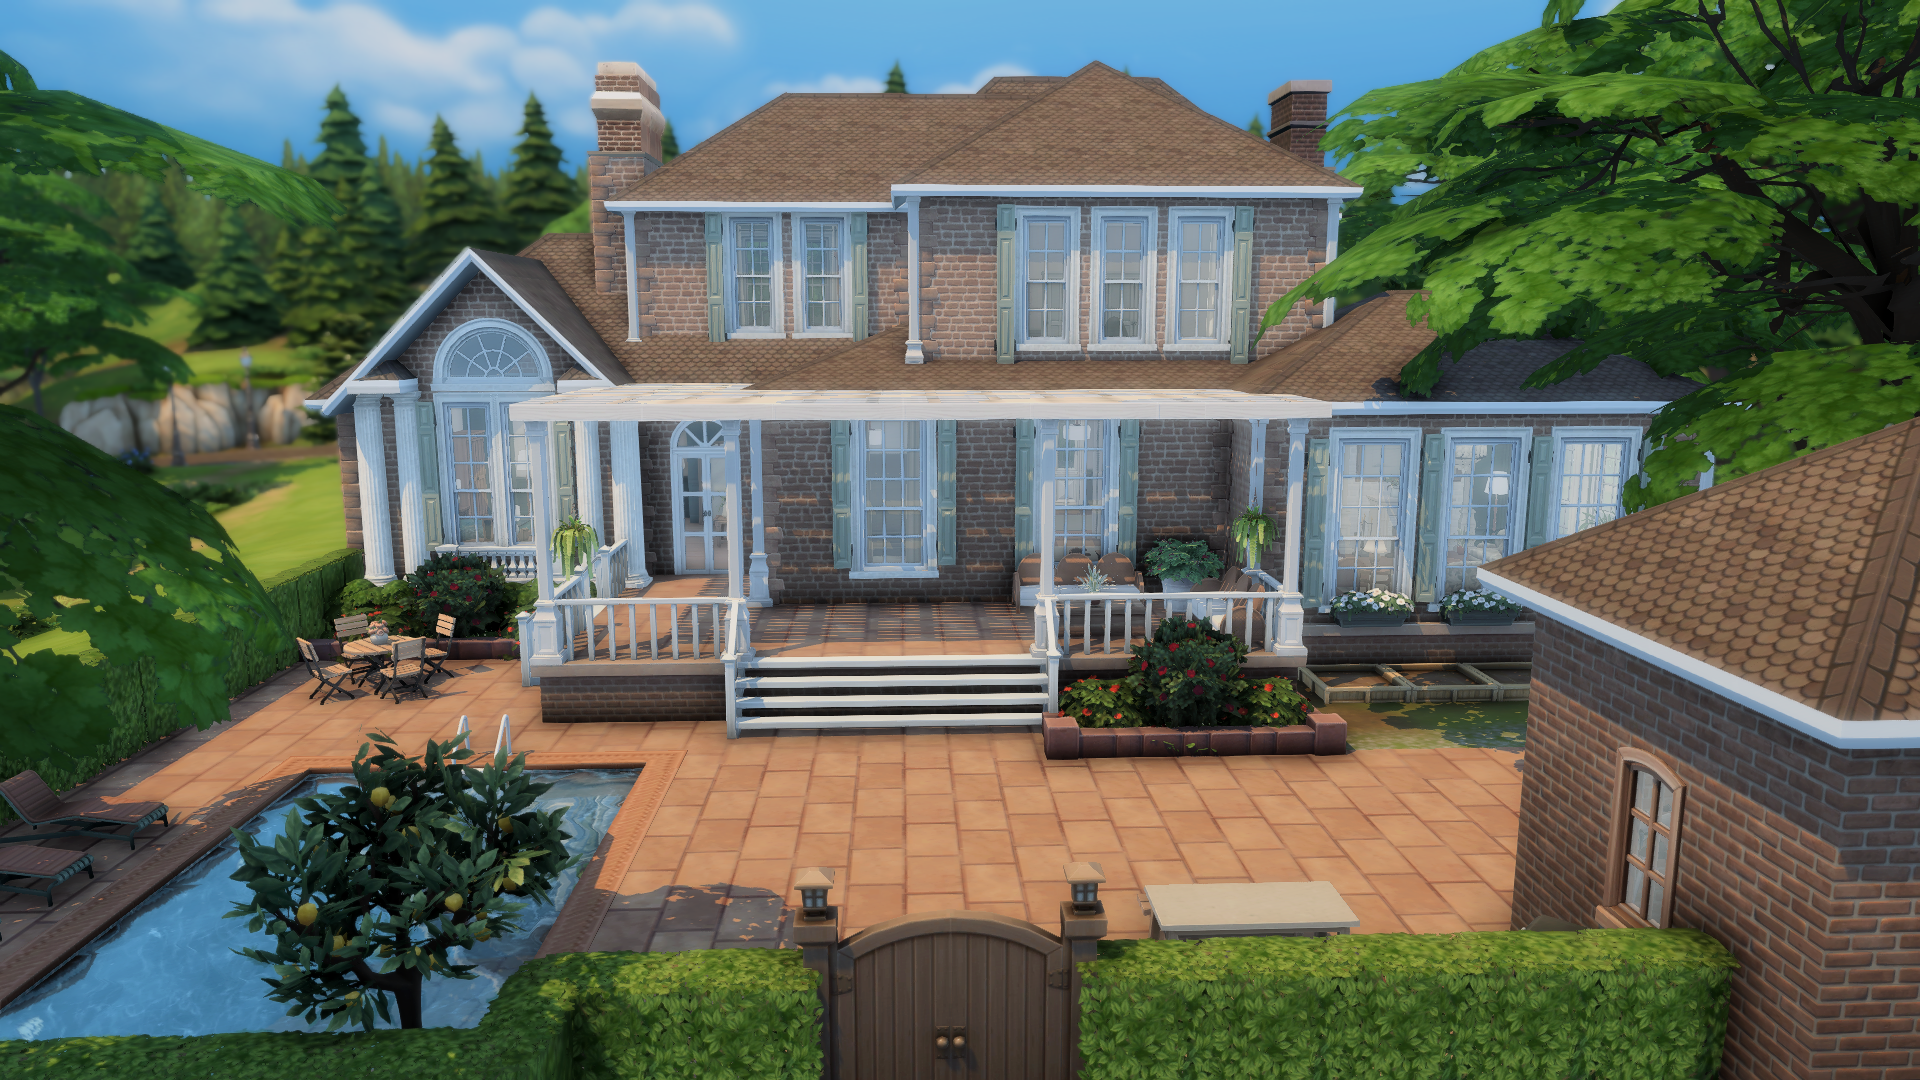 Tiger Bai - The Sims 4 Sims / Households - CurseForge